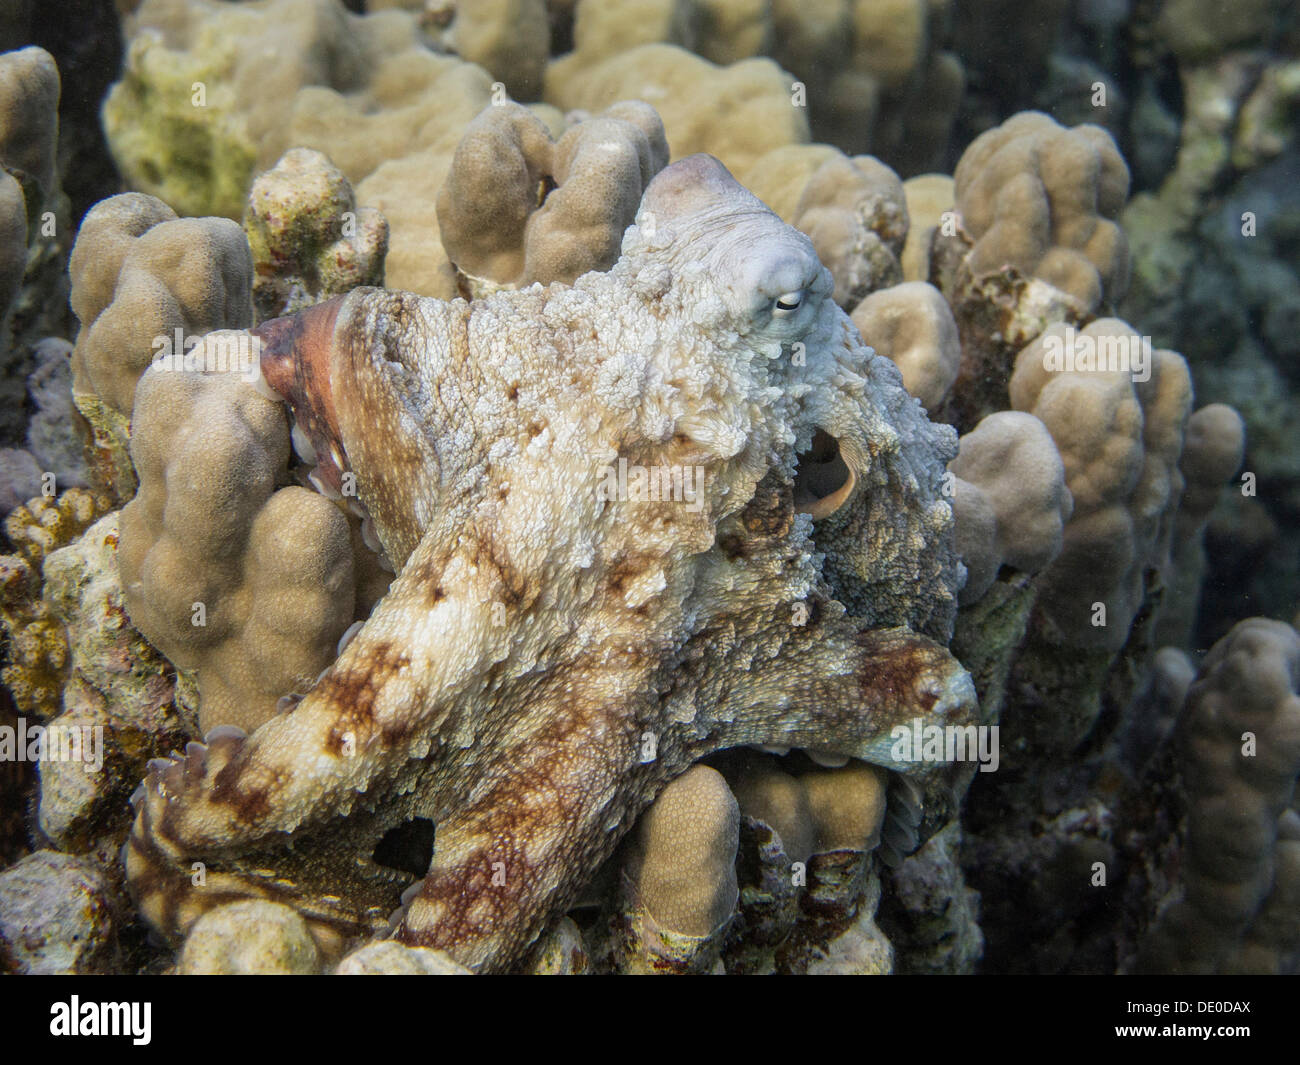 Reef Octopus (Octopus cyaneus), Mangrove Bay, Red Sea, Egypt, Africa Banque D'Images